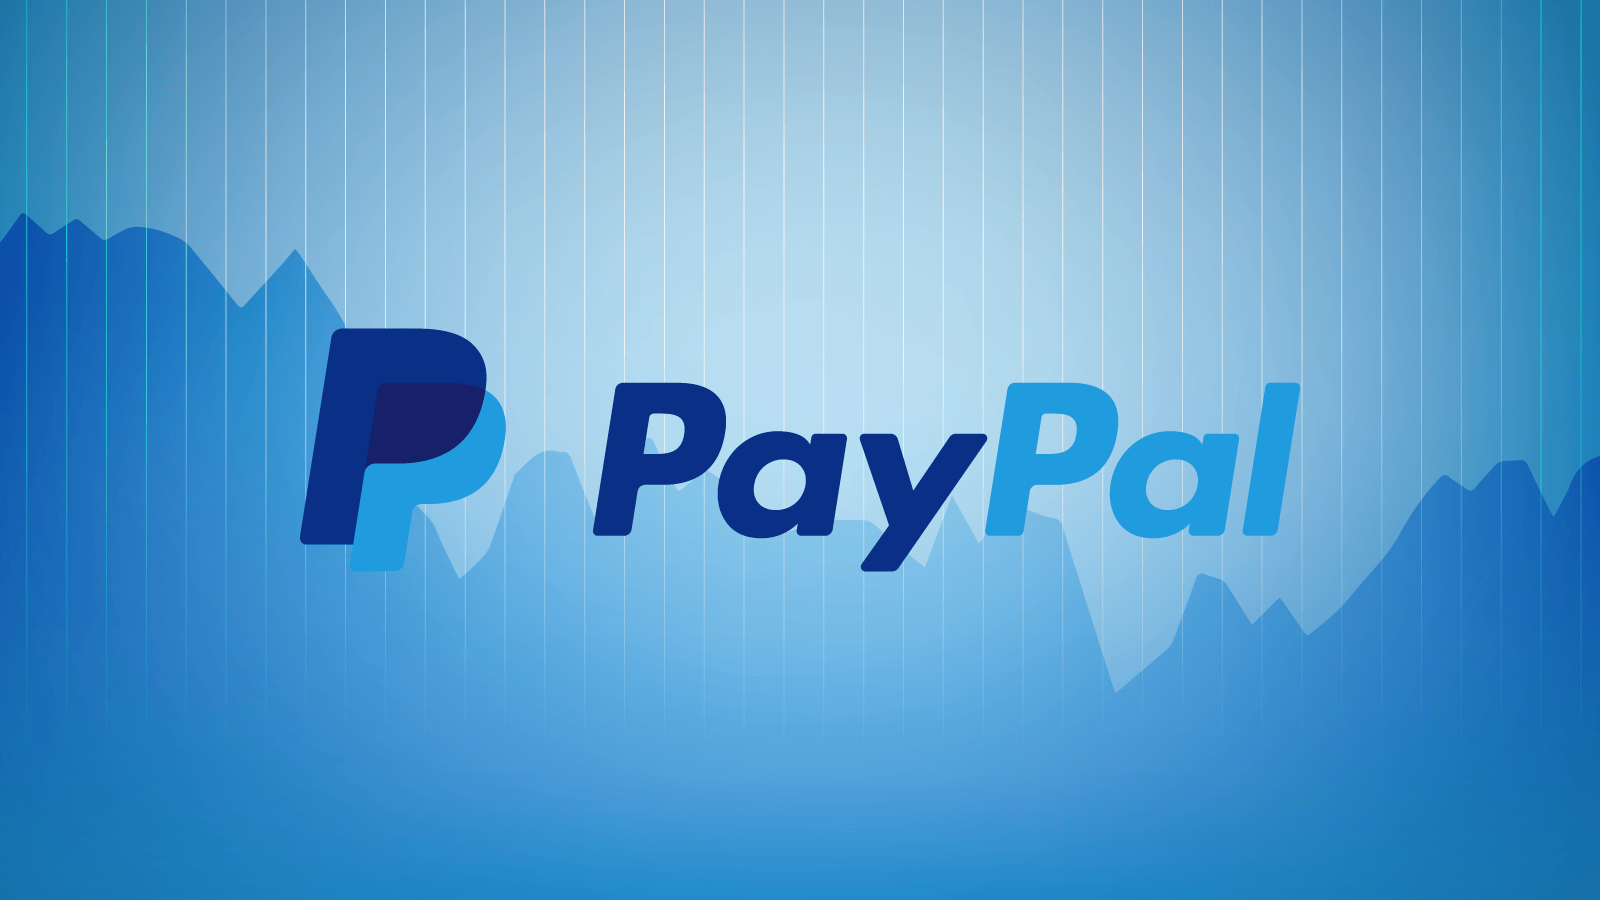 HD PayPal Verified Logo - Complete Process For PayPal Verification| PayPal Account Not Verified